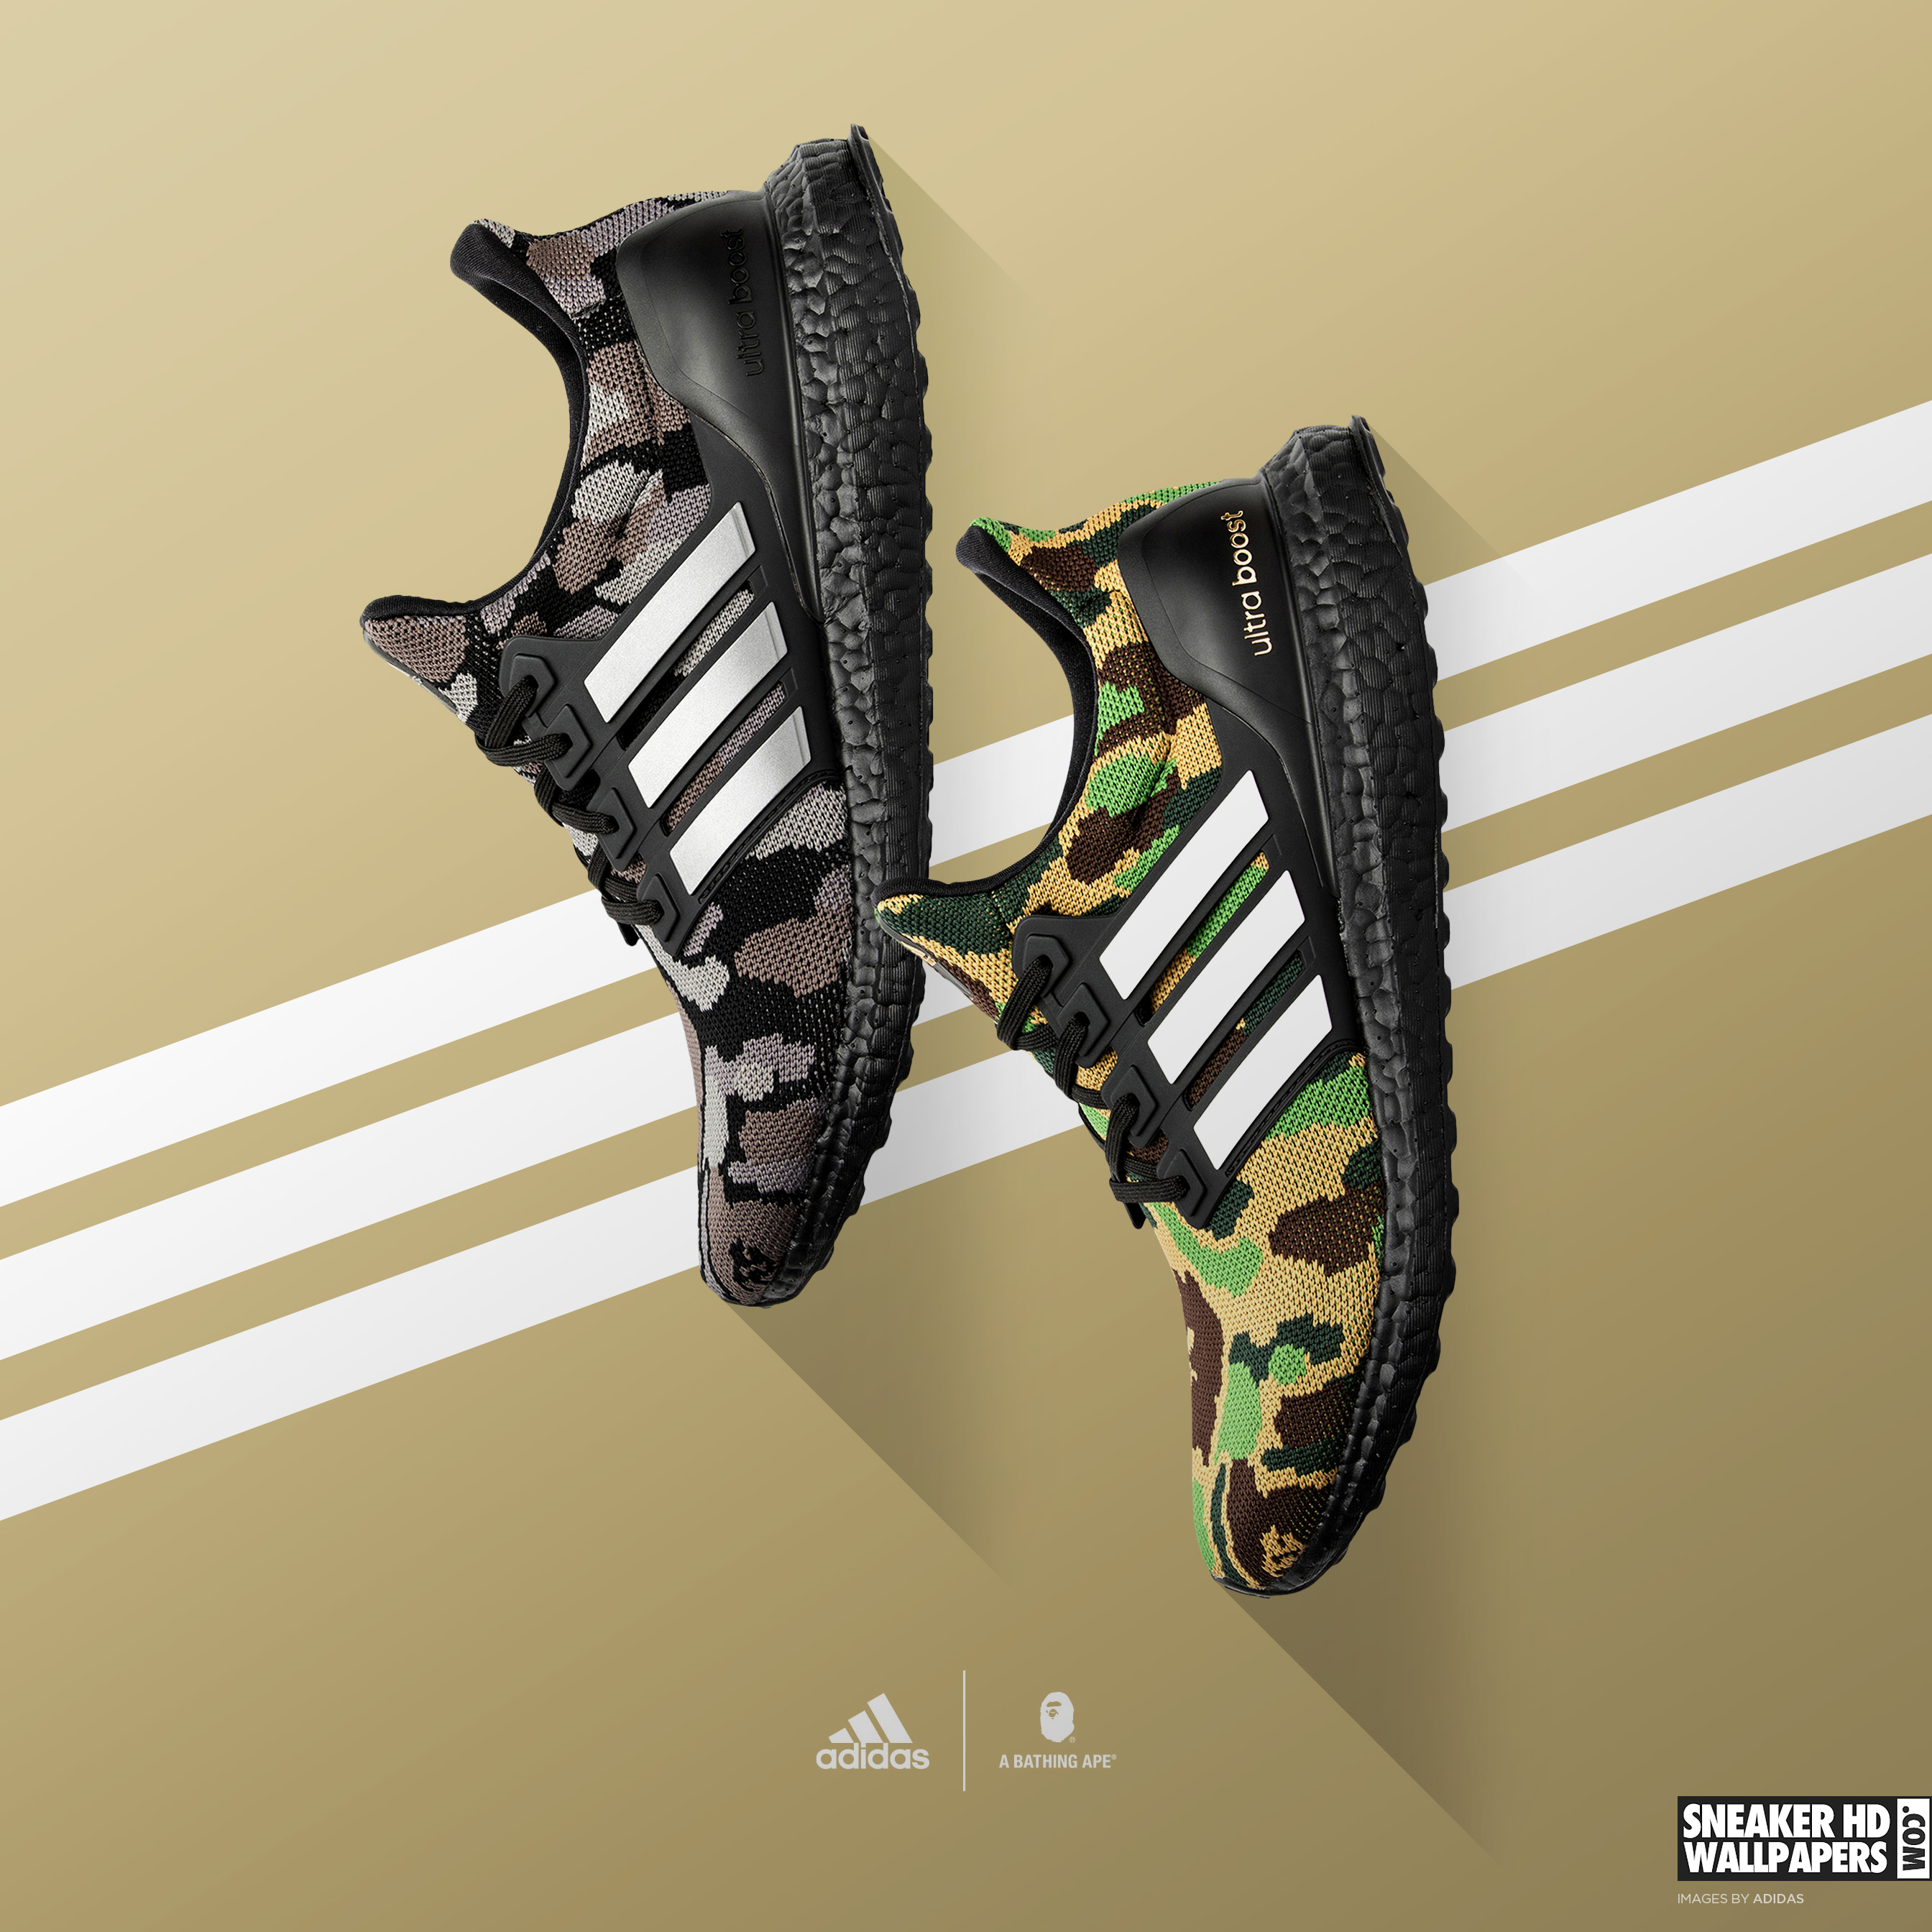 Adidas Boost Wallpapers